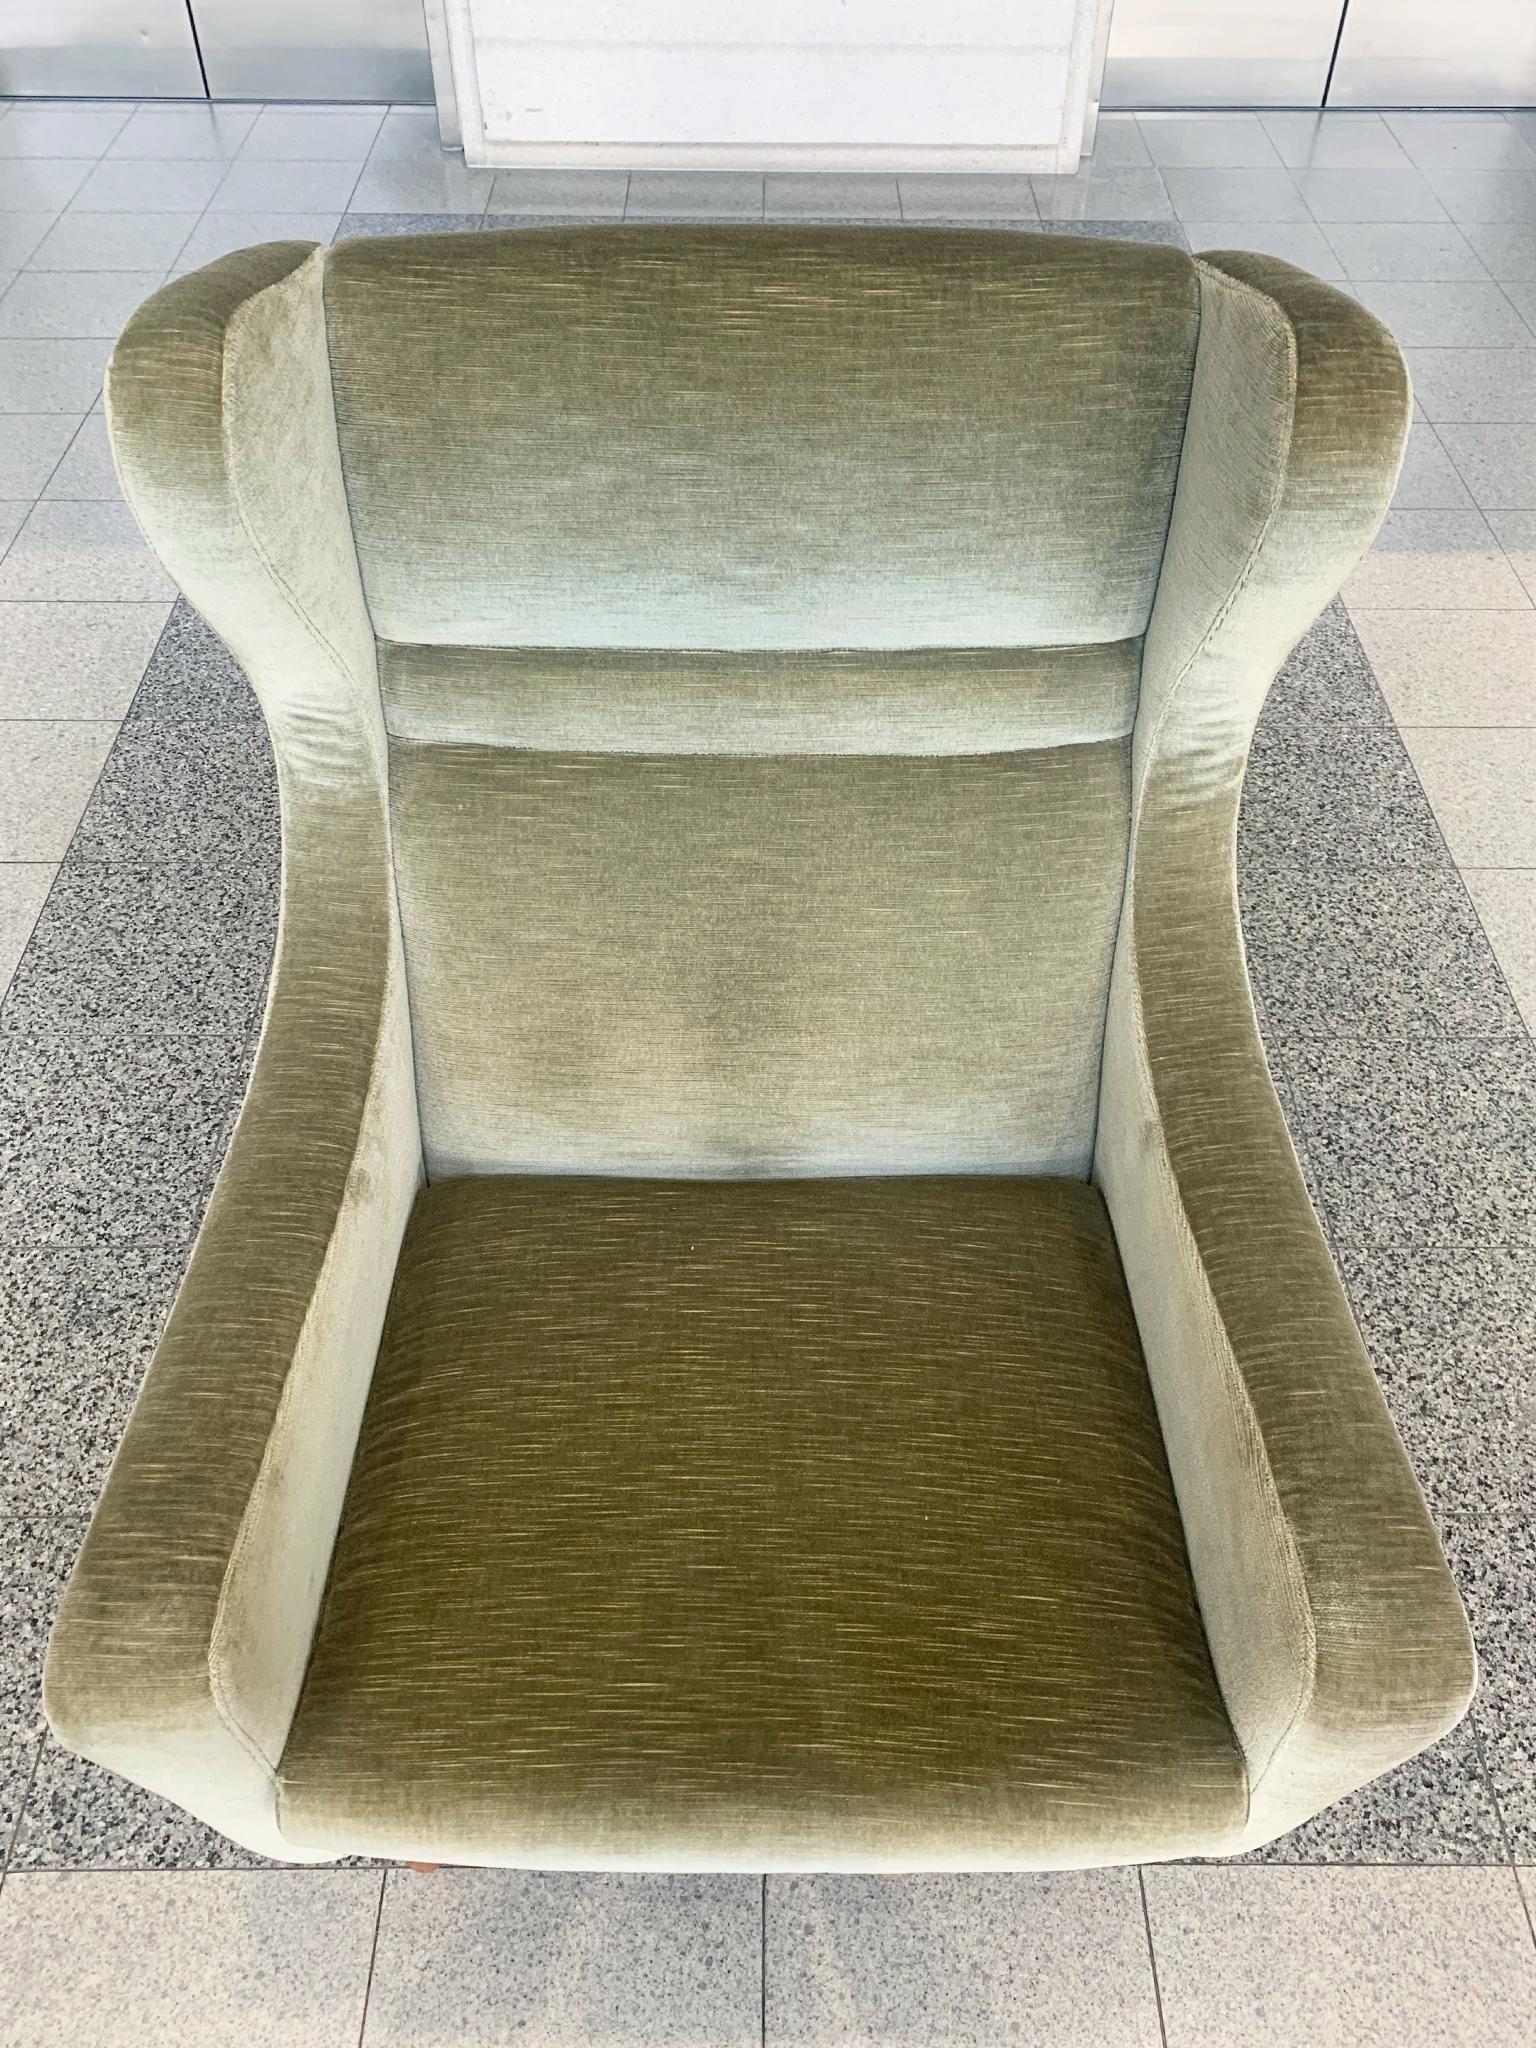 Classic Danish Modern wingback with a lovely moss-green upholstery and teak legs, made by Rolschau Møbler in the Mid-20th Century. We love the dramatic slope of the arms and the tufted detailing of the back. There's a warm, inviting character to